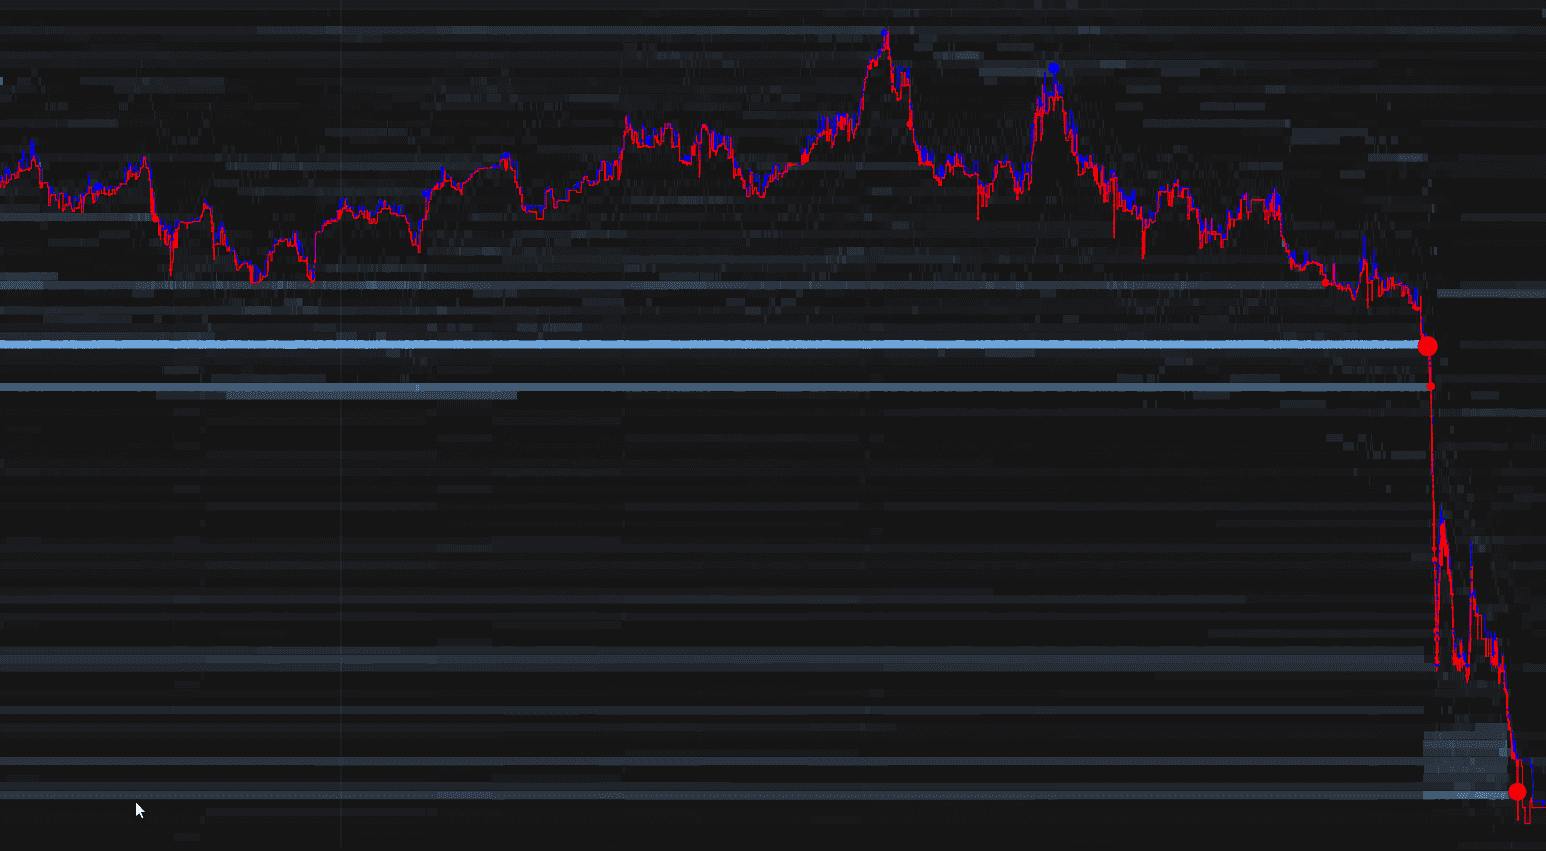 A screenshot of the Cryptoviz interface showing a large market event where a long-standing buy wall was broken by an extremely large sell order